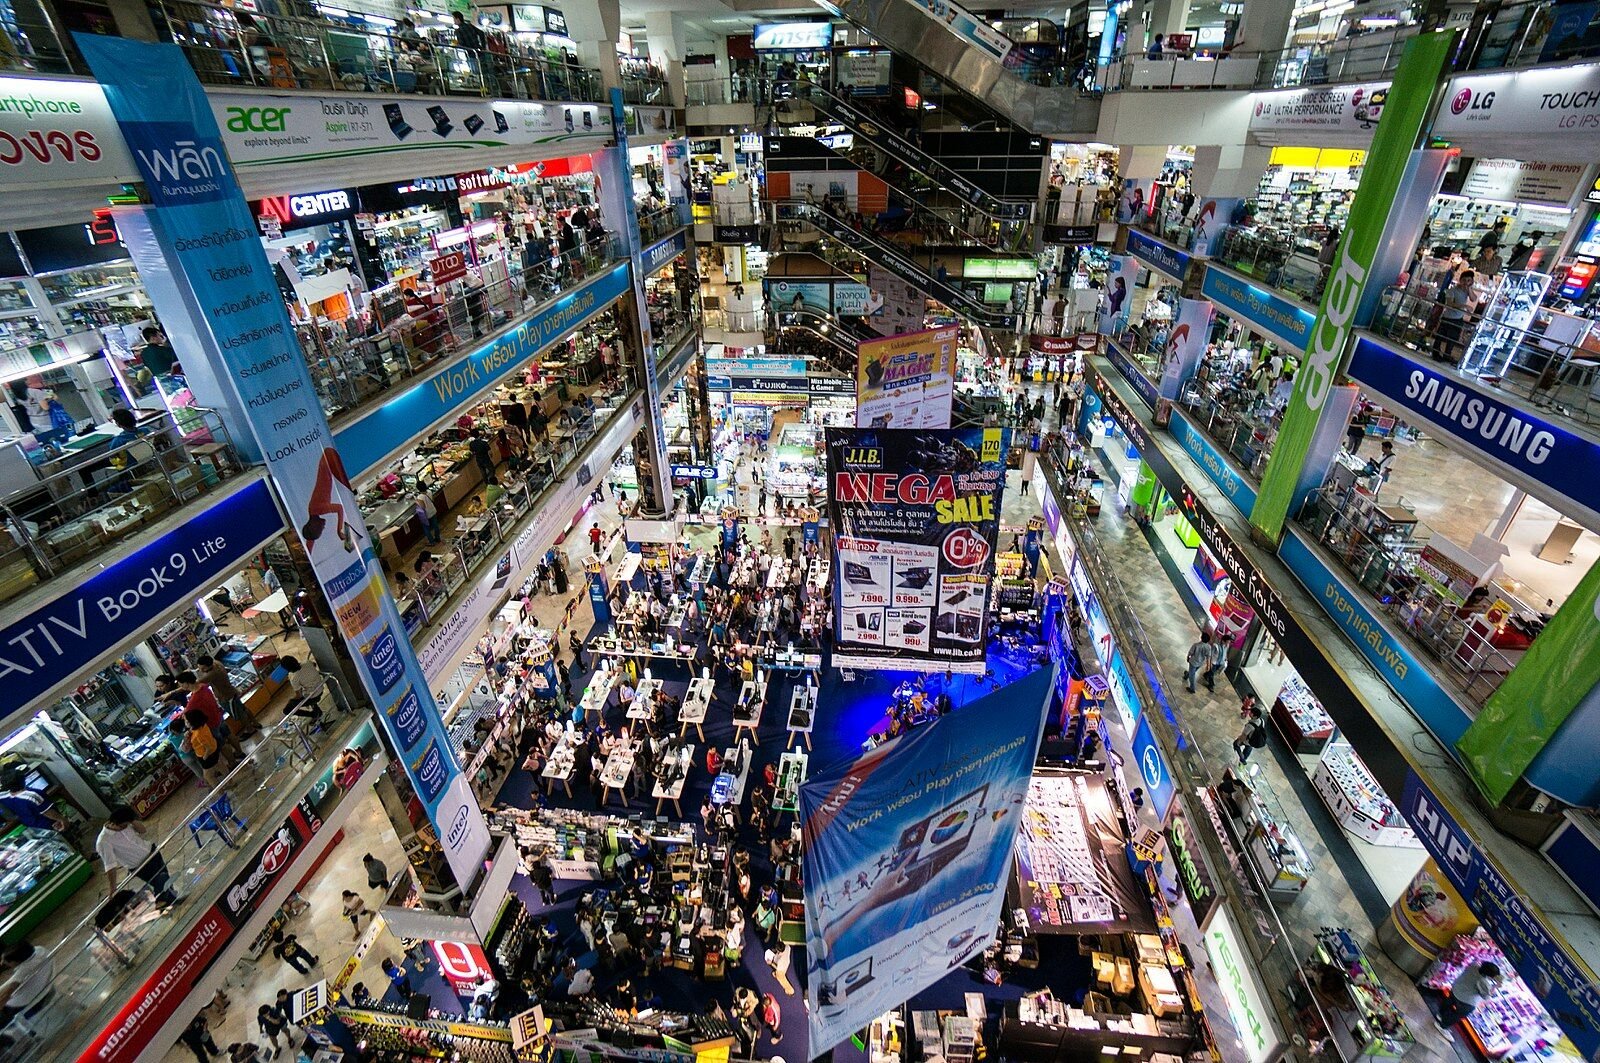 Get your geek on at these best IT stores in Thailand | News by Thaiger